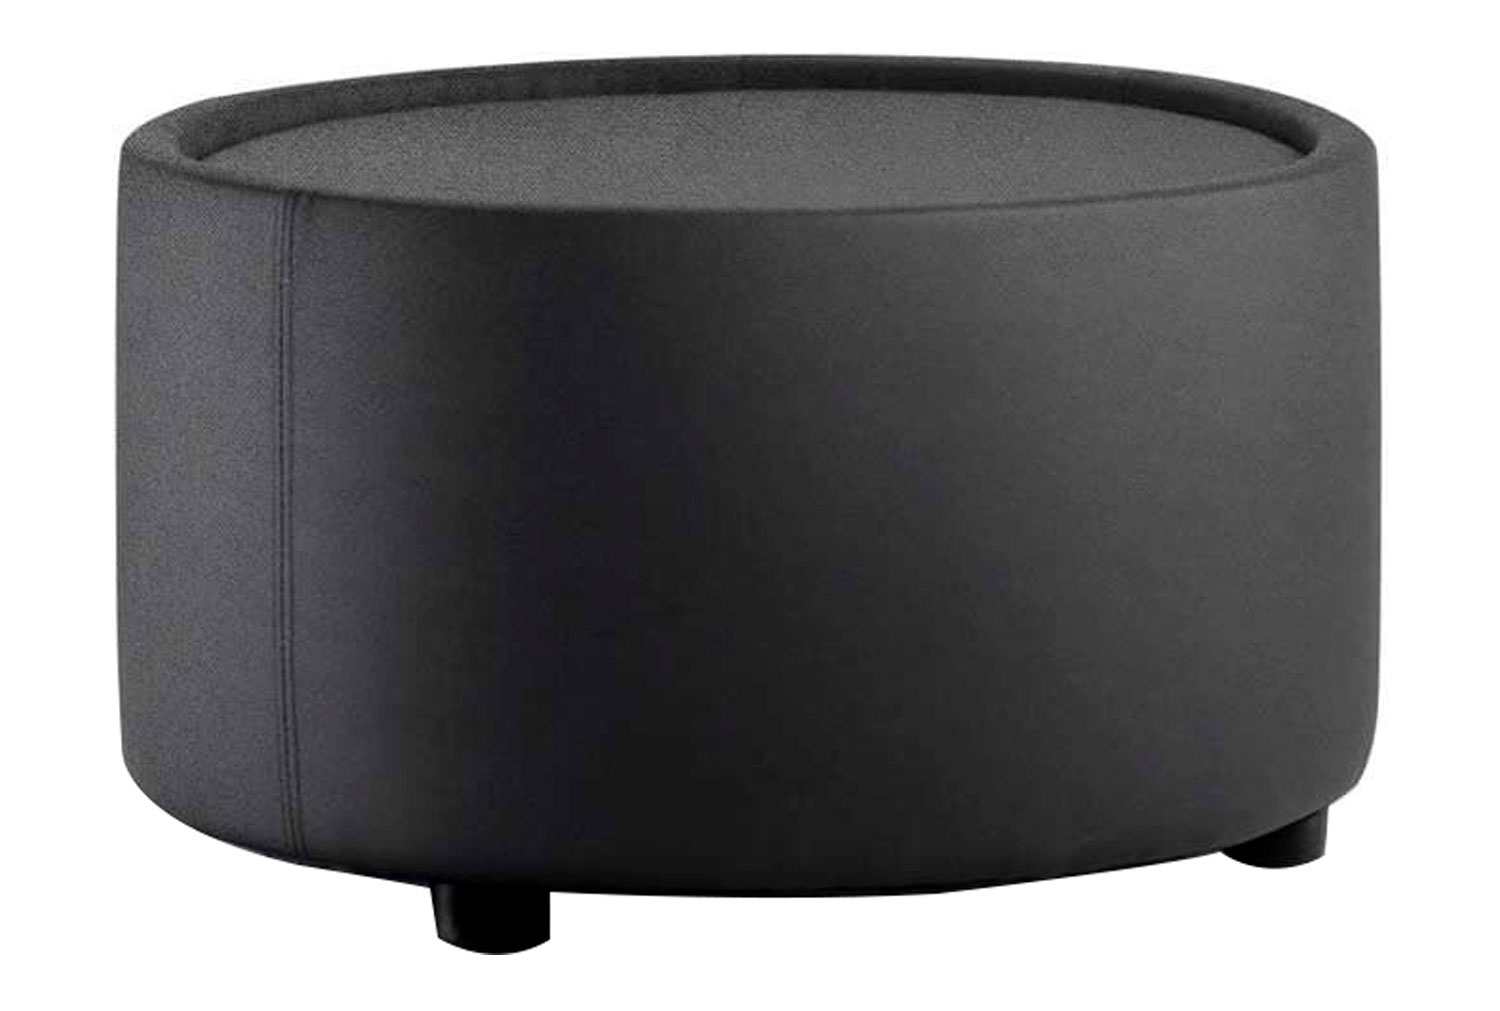 Zola Round Fabric Coffee Table (Black), Express Delivery